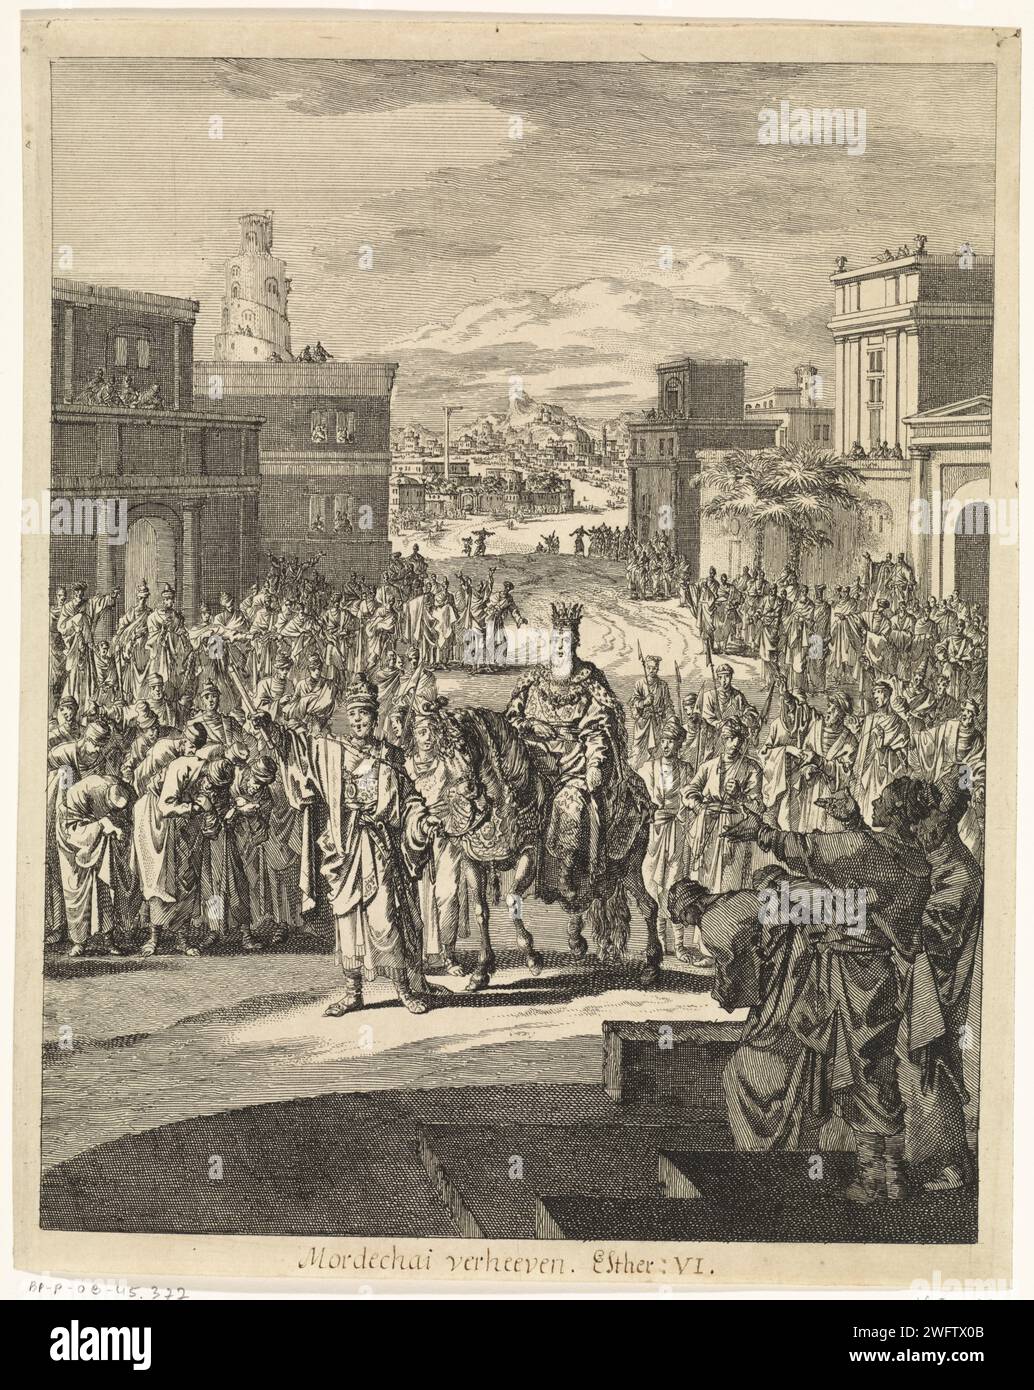 Triumph Van Mordechai, Jan Luyken, 1708 print  Amsterdam paper etching Mordecai's triumph: Mordecai, mounted on the king's horse, is led through the city by Haman (Esther and Ahasuerus may be looking on from the palace) Stock Photo